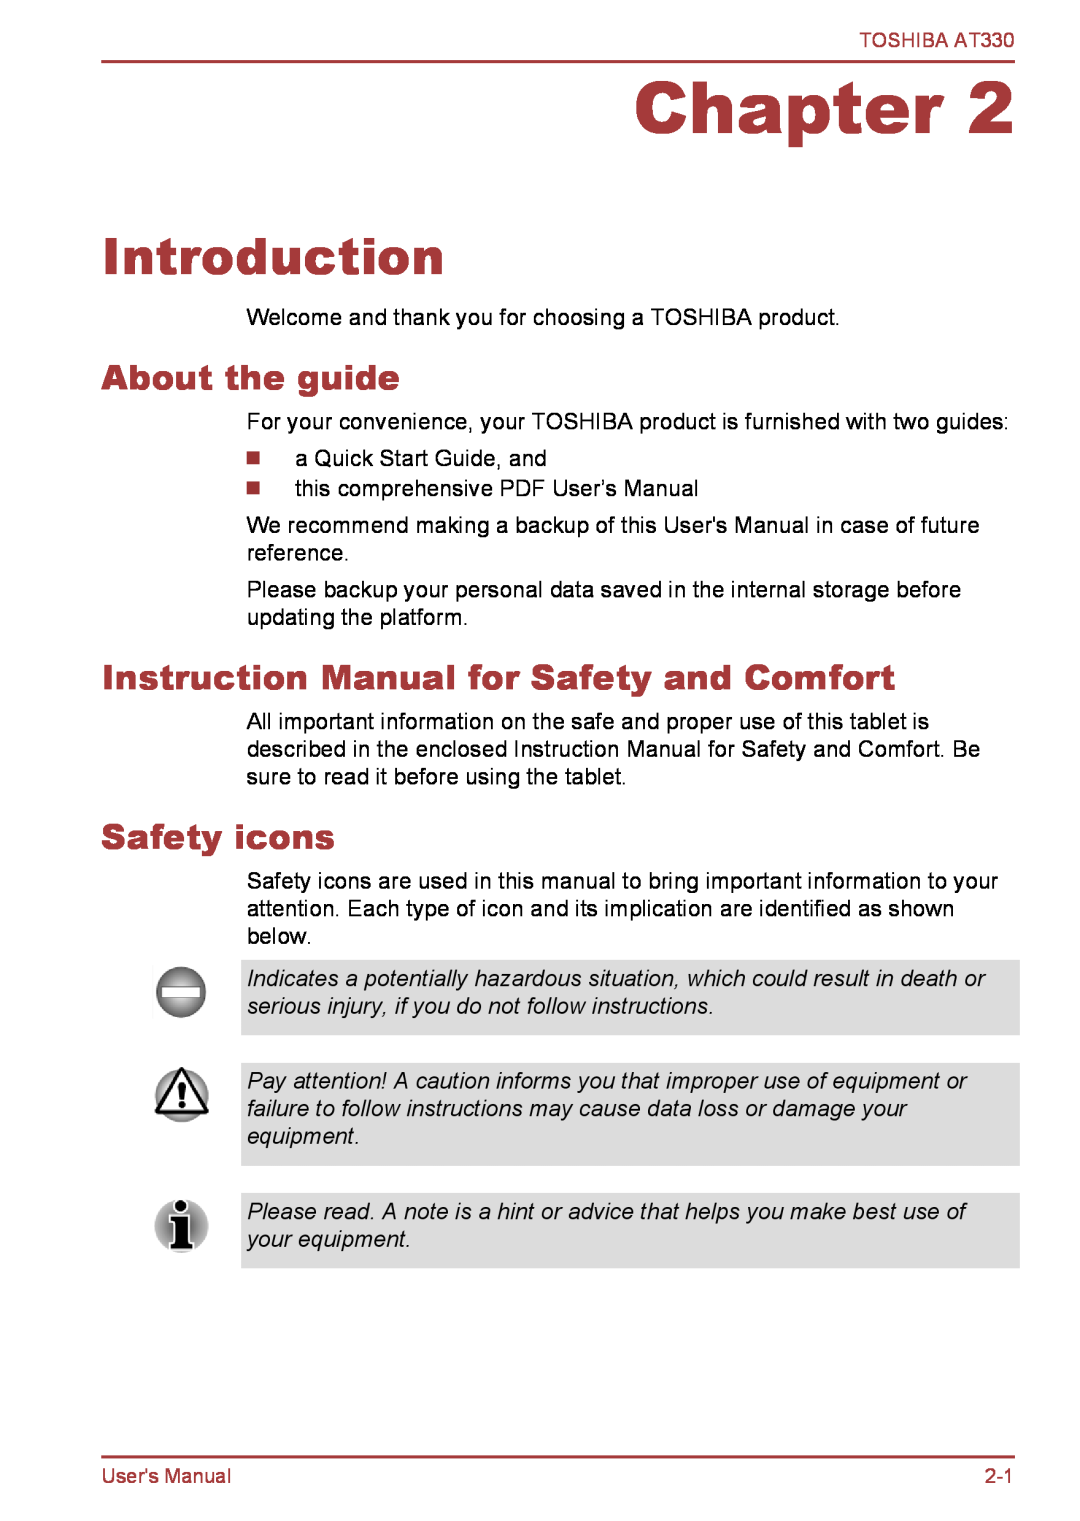 Toshiba at330 user manual Introduction, About the guide, Instruction Manual for Safety and Comfort, Safety icons, Chapter 